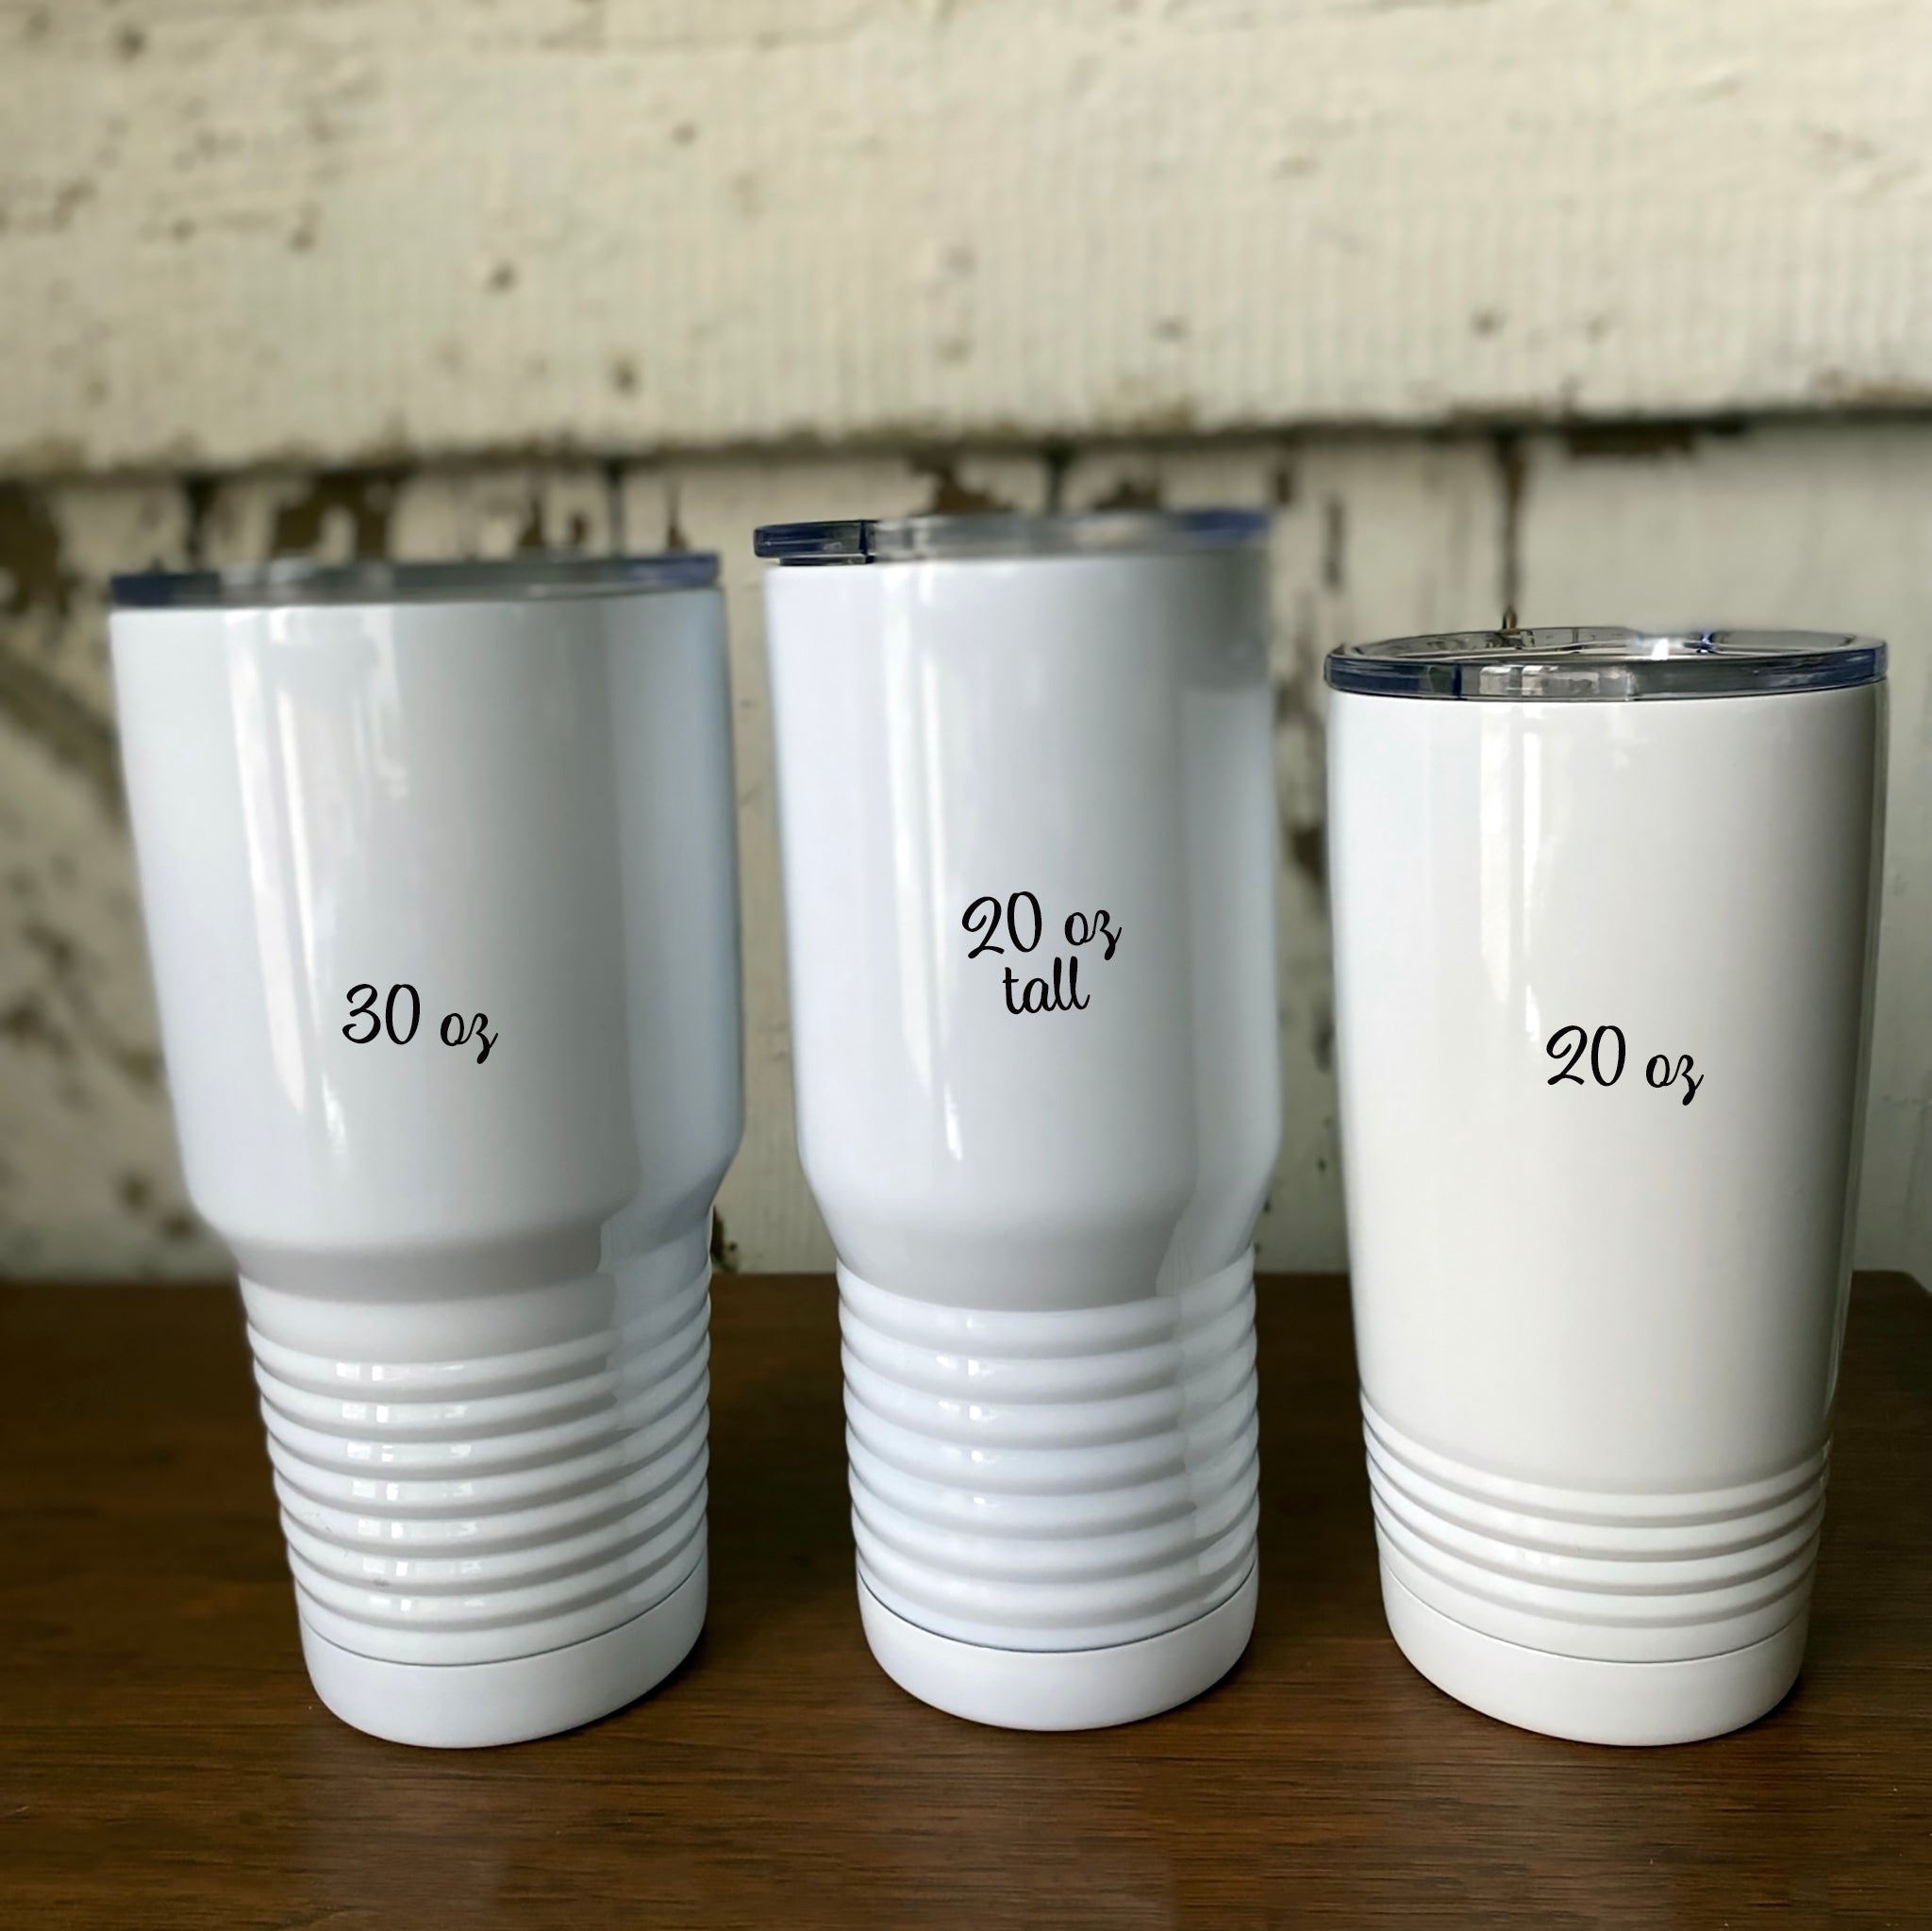 30 oz. BOSS Double Wall Stainless Steel Tumblers Wholesale